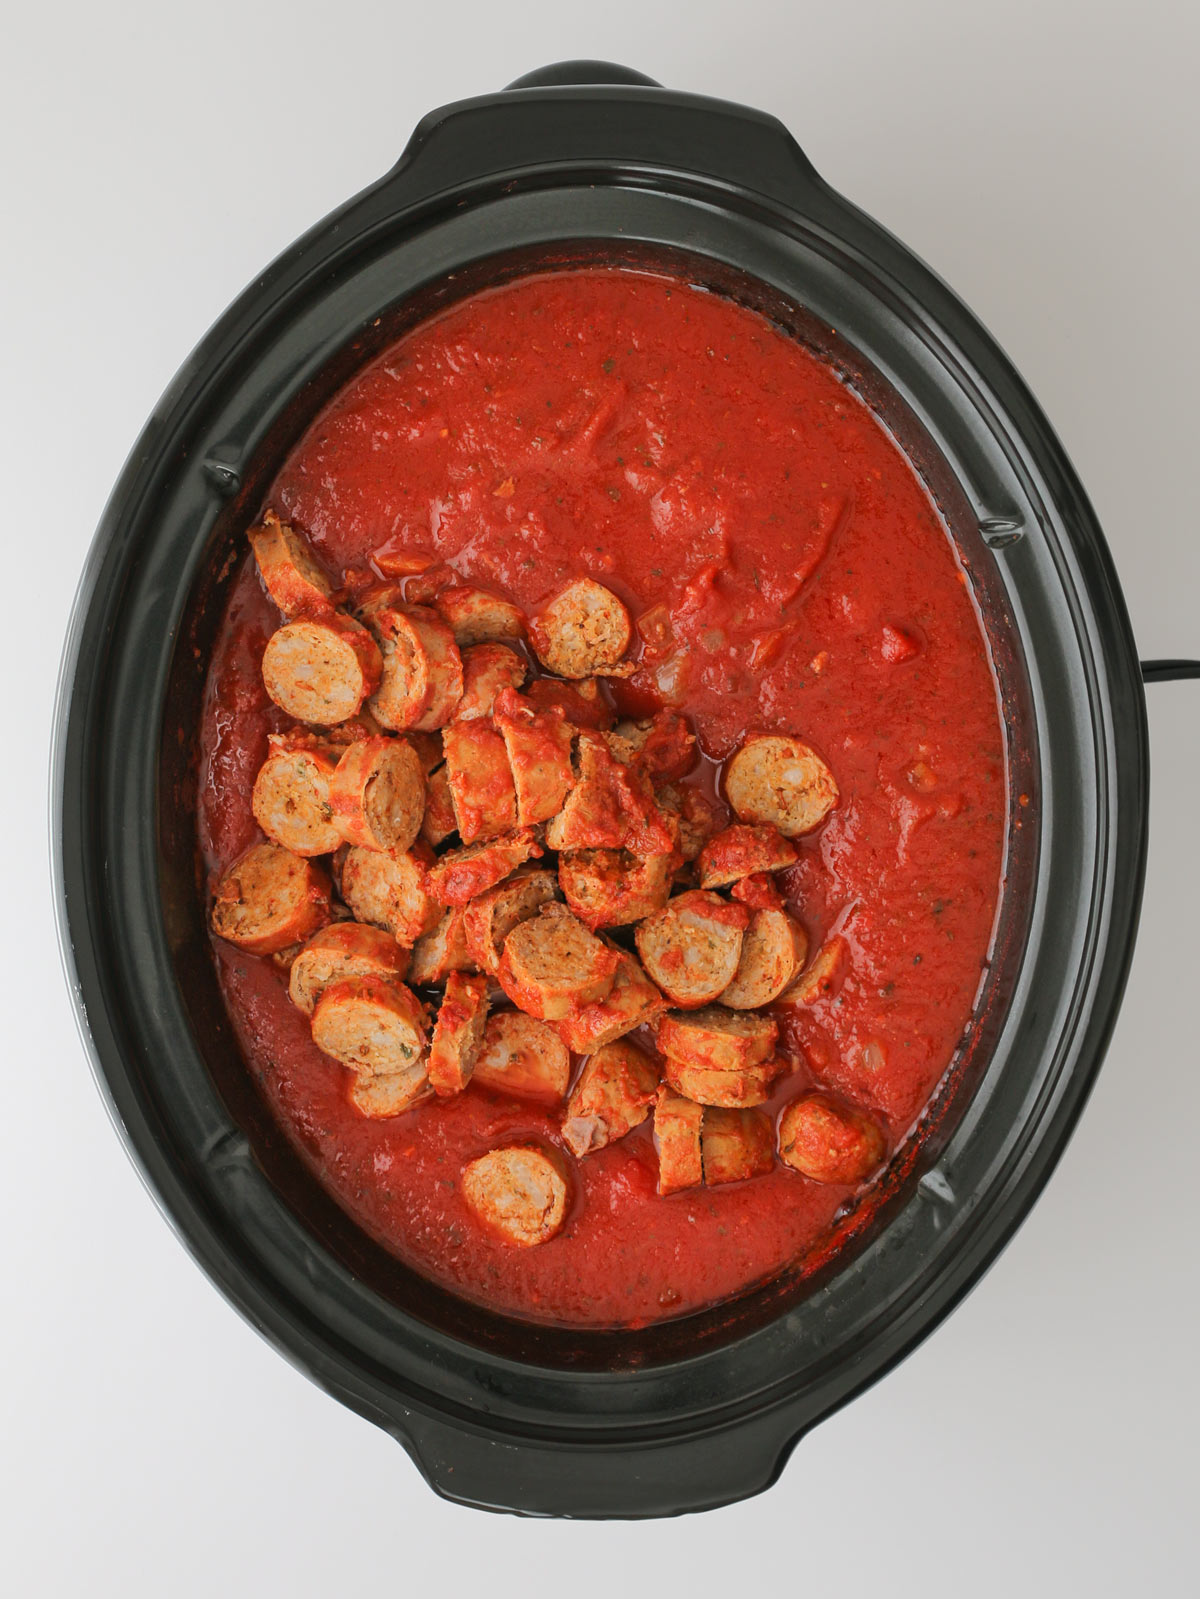 adding sausage slices back to sauce in the pot.